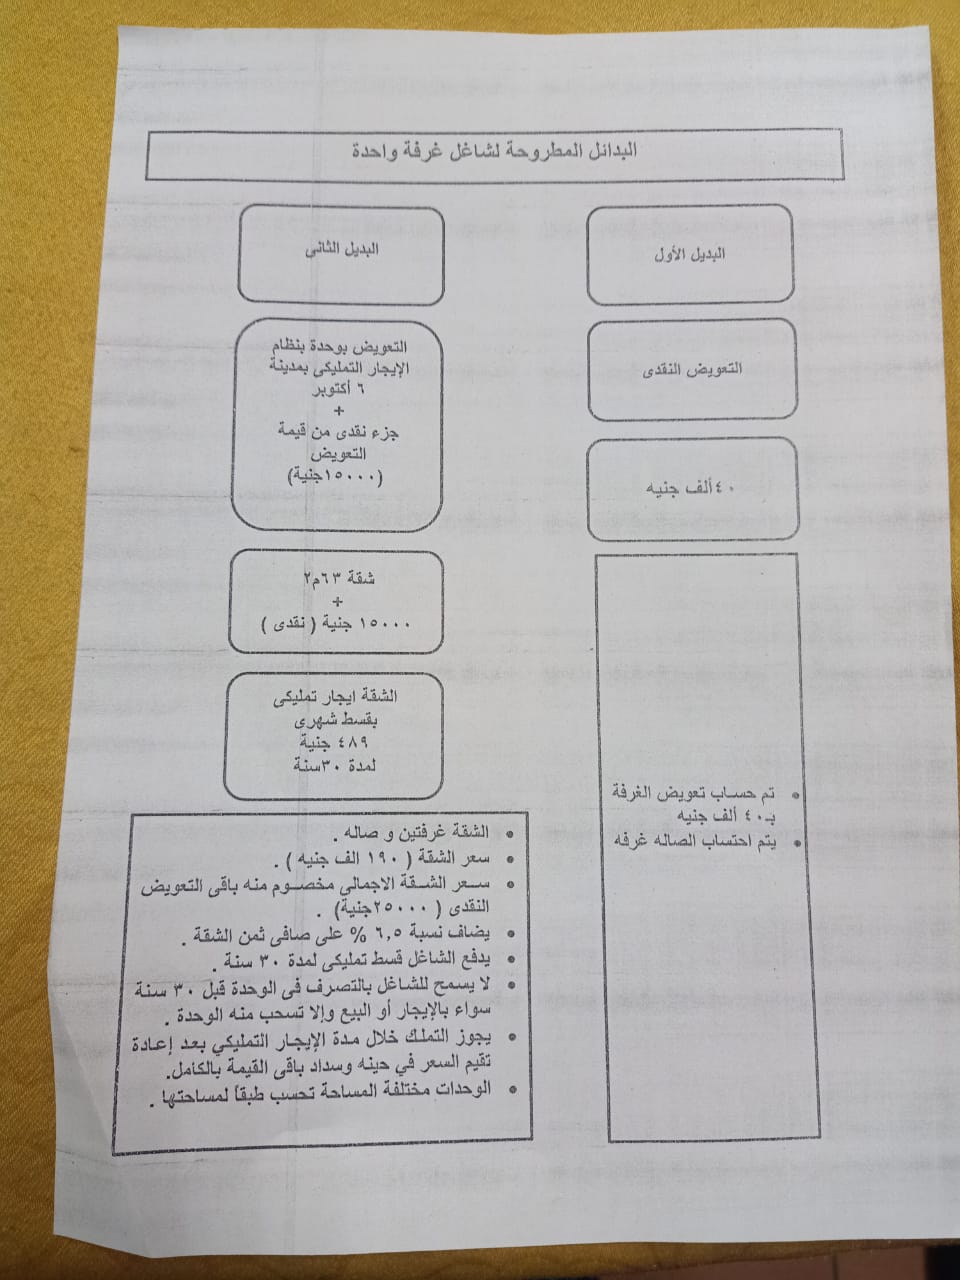 A compensation form distributed by Giza governorate to owners and tenants on the Tersa Axis (Al-Youm al-Sabe')